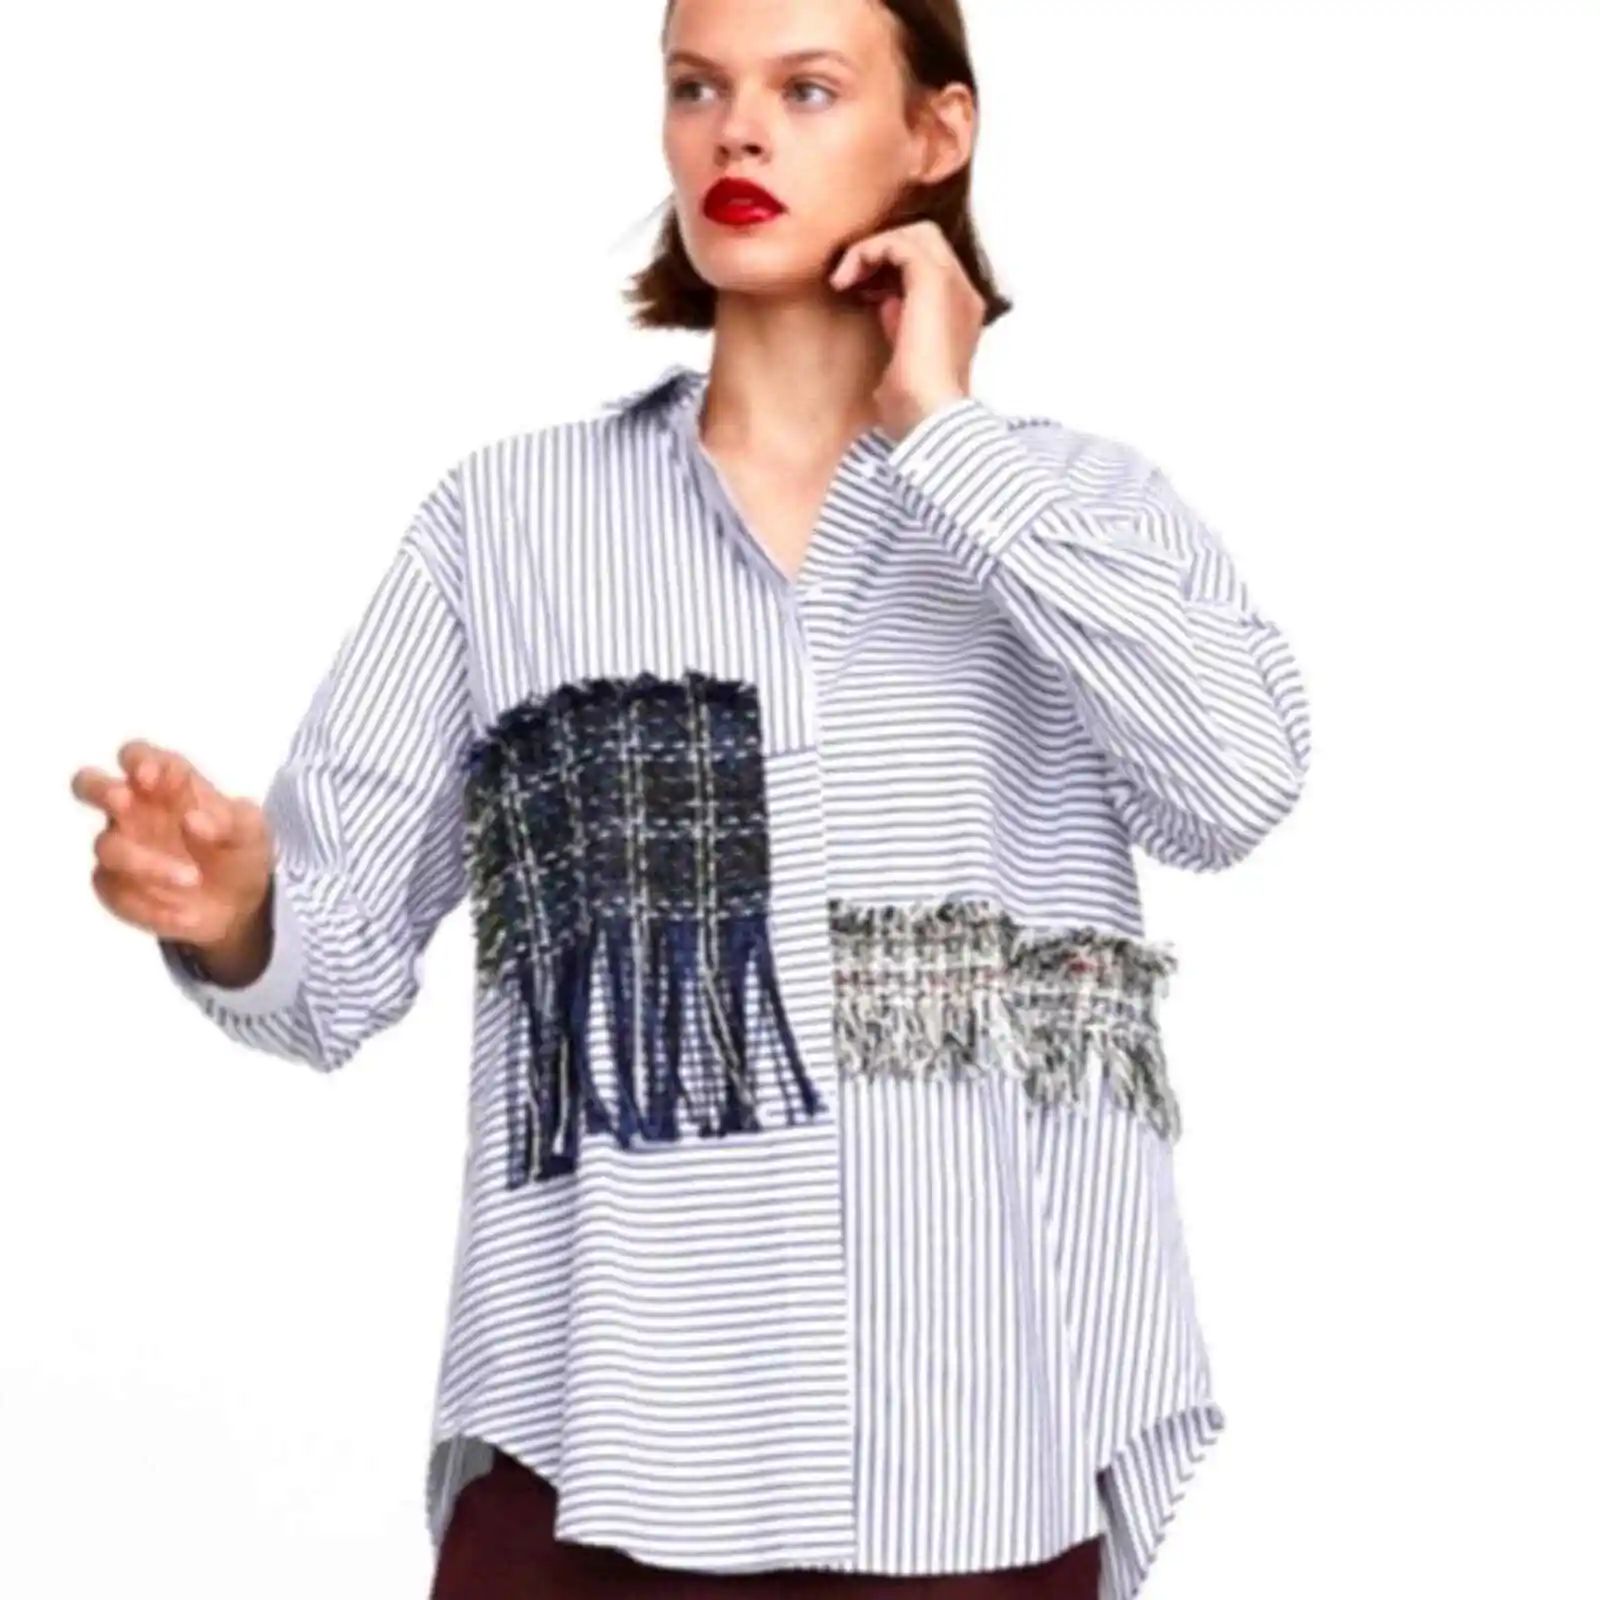 Zara blue and white striped contrast tweed long sleeved button down shirt NWOT M  | eBay | eBay US